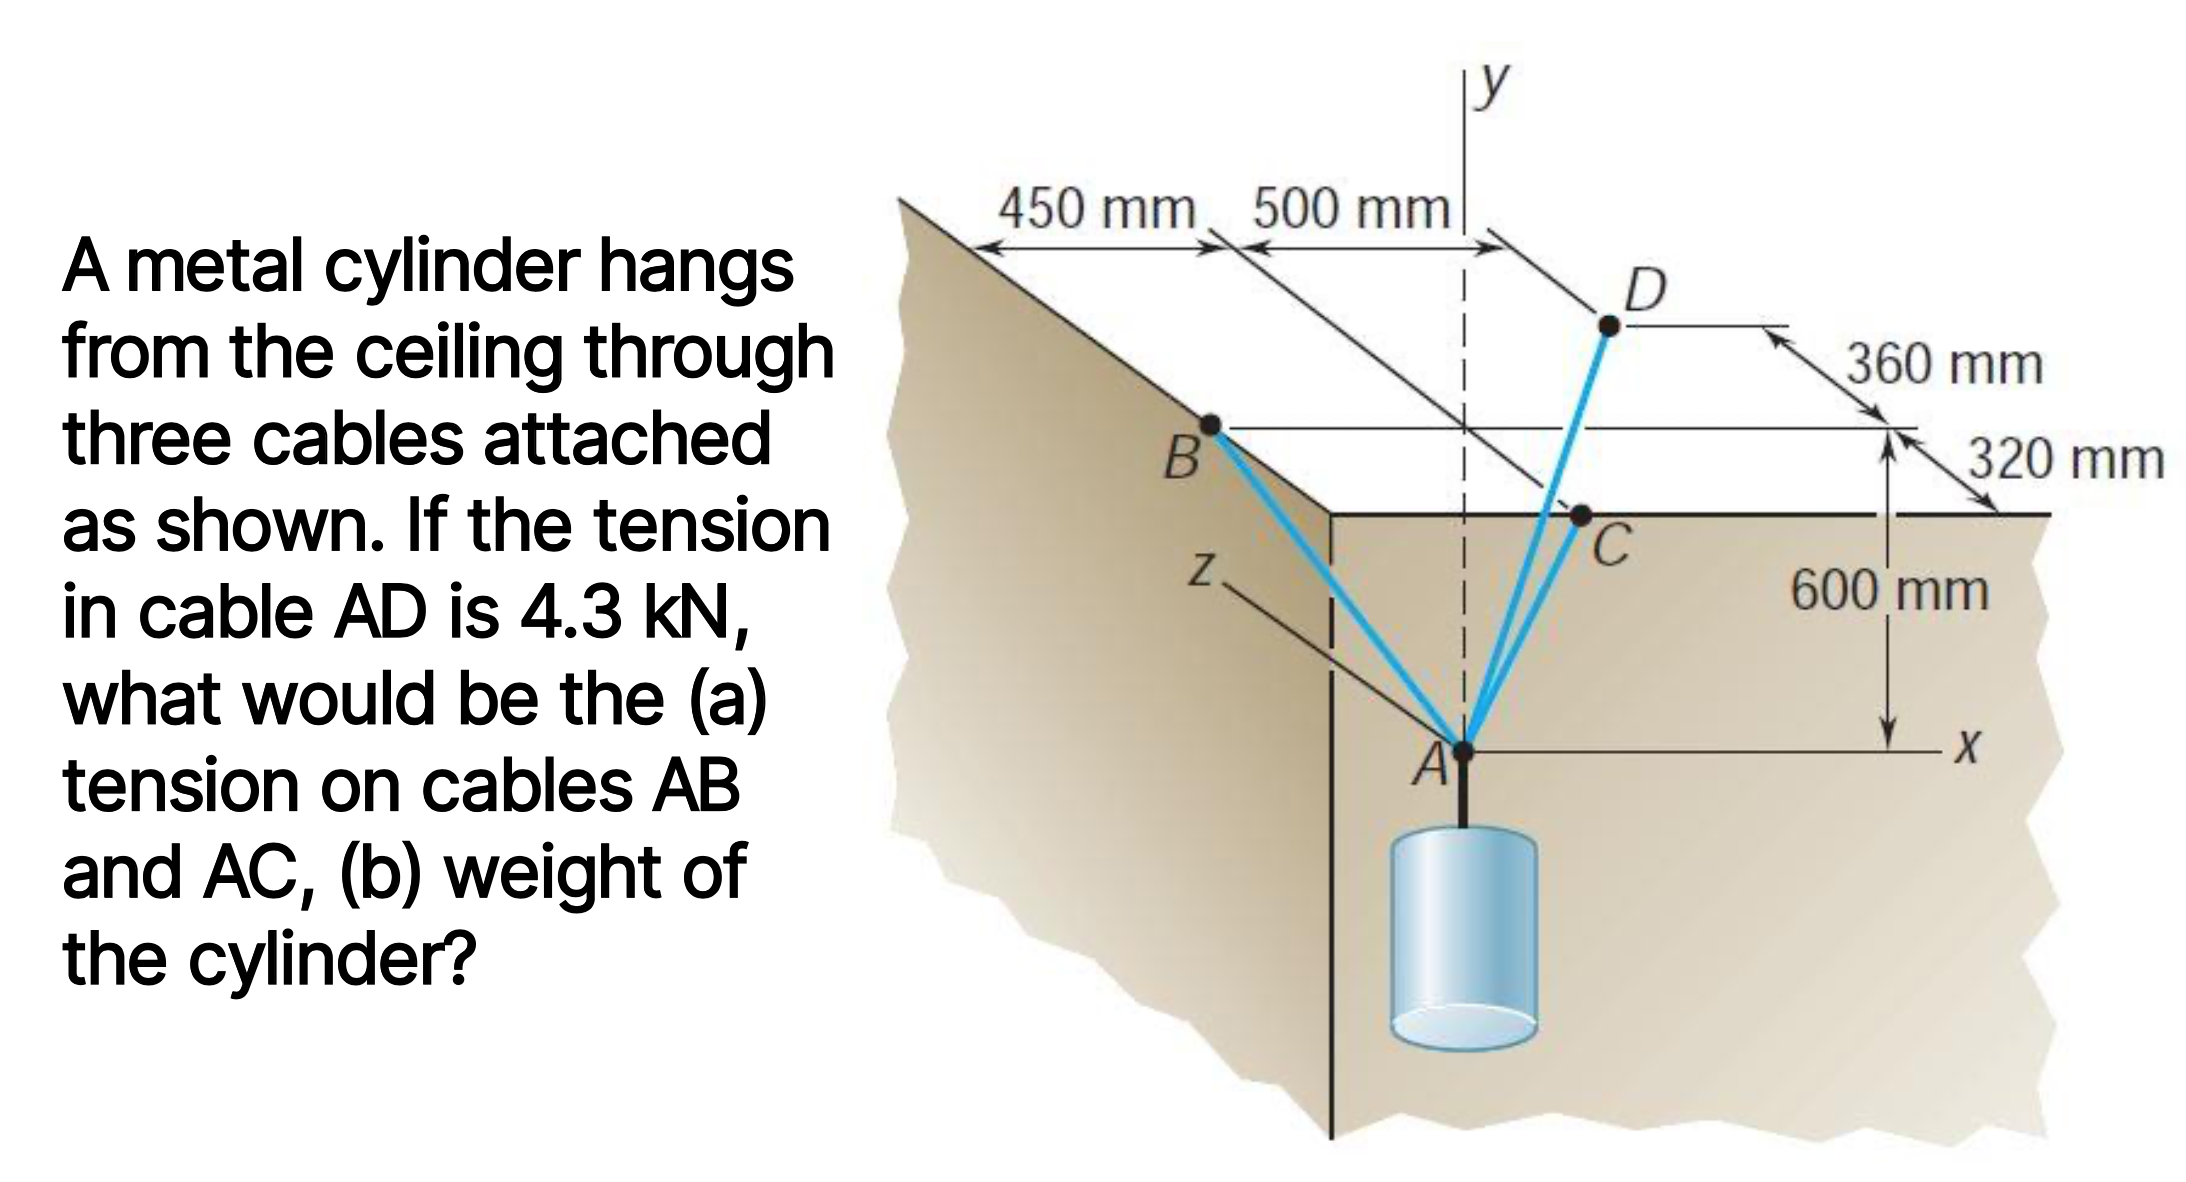 A metal cylinder hangs
from the ceiling through
three cables attached
as shown. If the tension
in cable AD is 4.3 kN,
what would be the (a)
tension on cables AB
and AC, (b) weight of
the cylinder?
